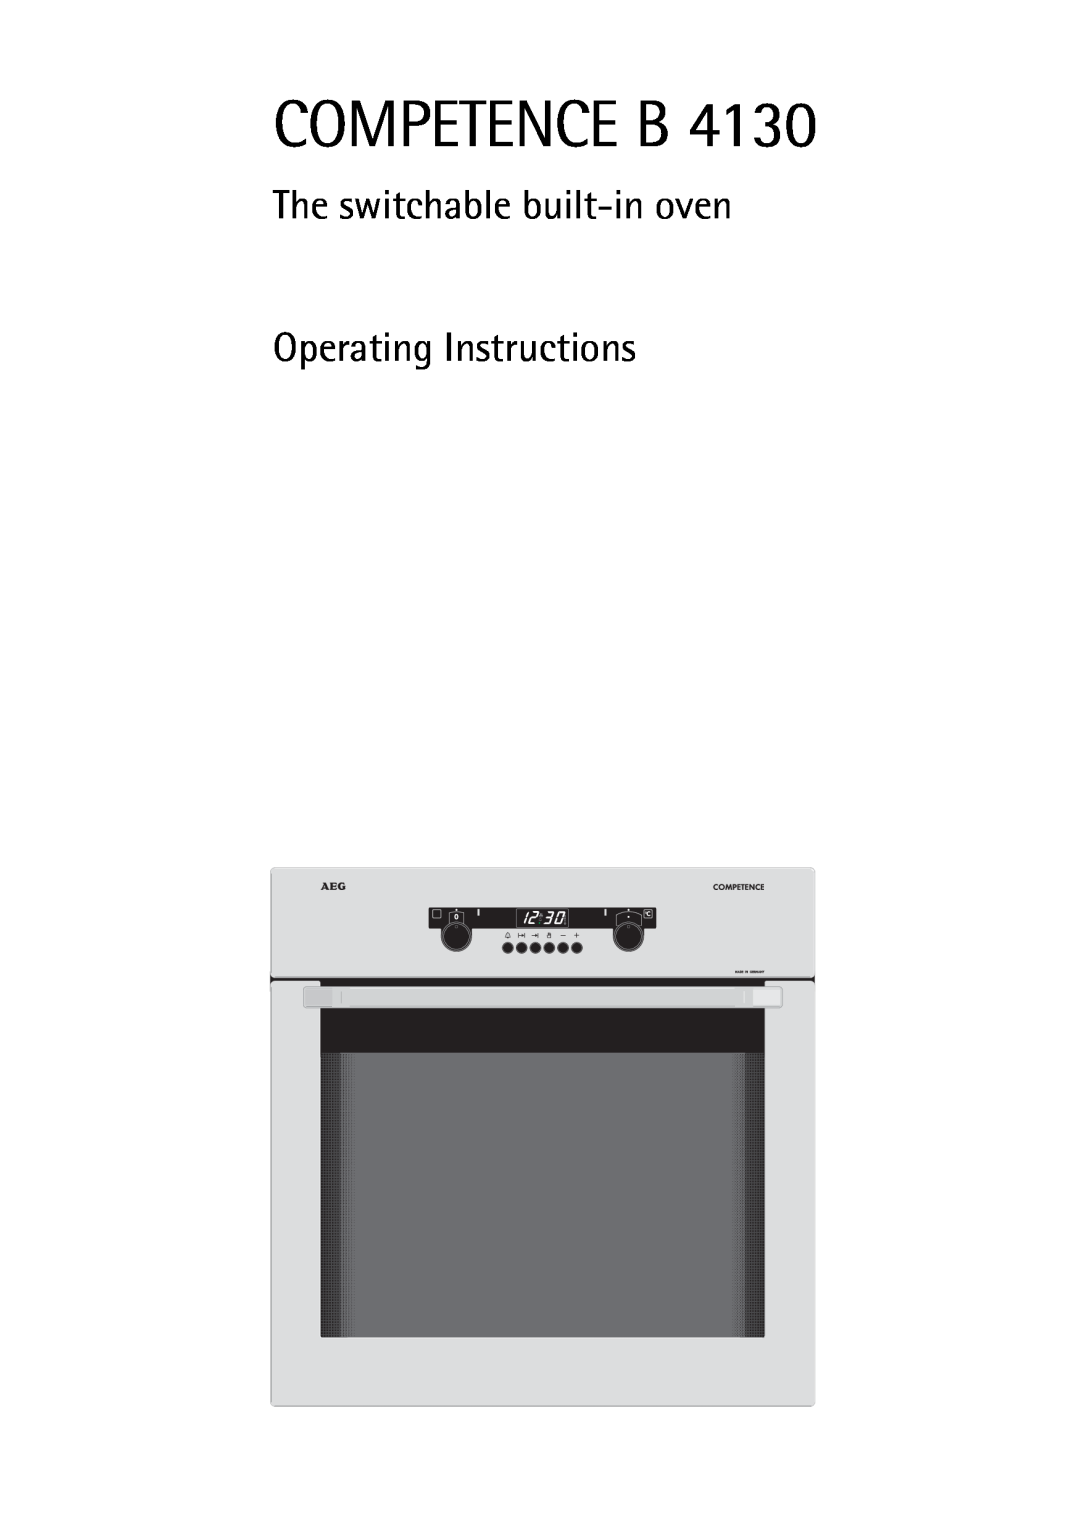 AEG B 4130 manual Competence B, The switchable built-inoven, Operating Instructions 